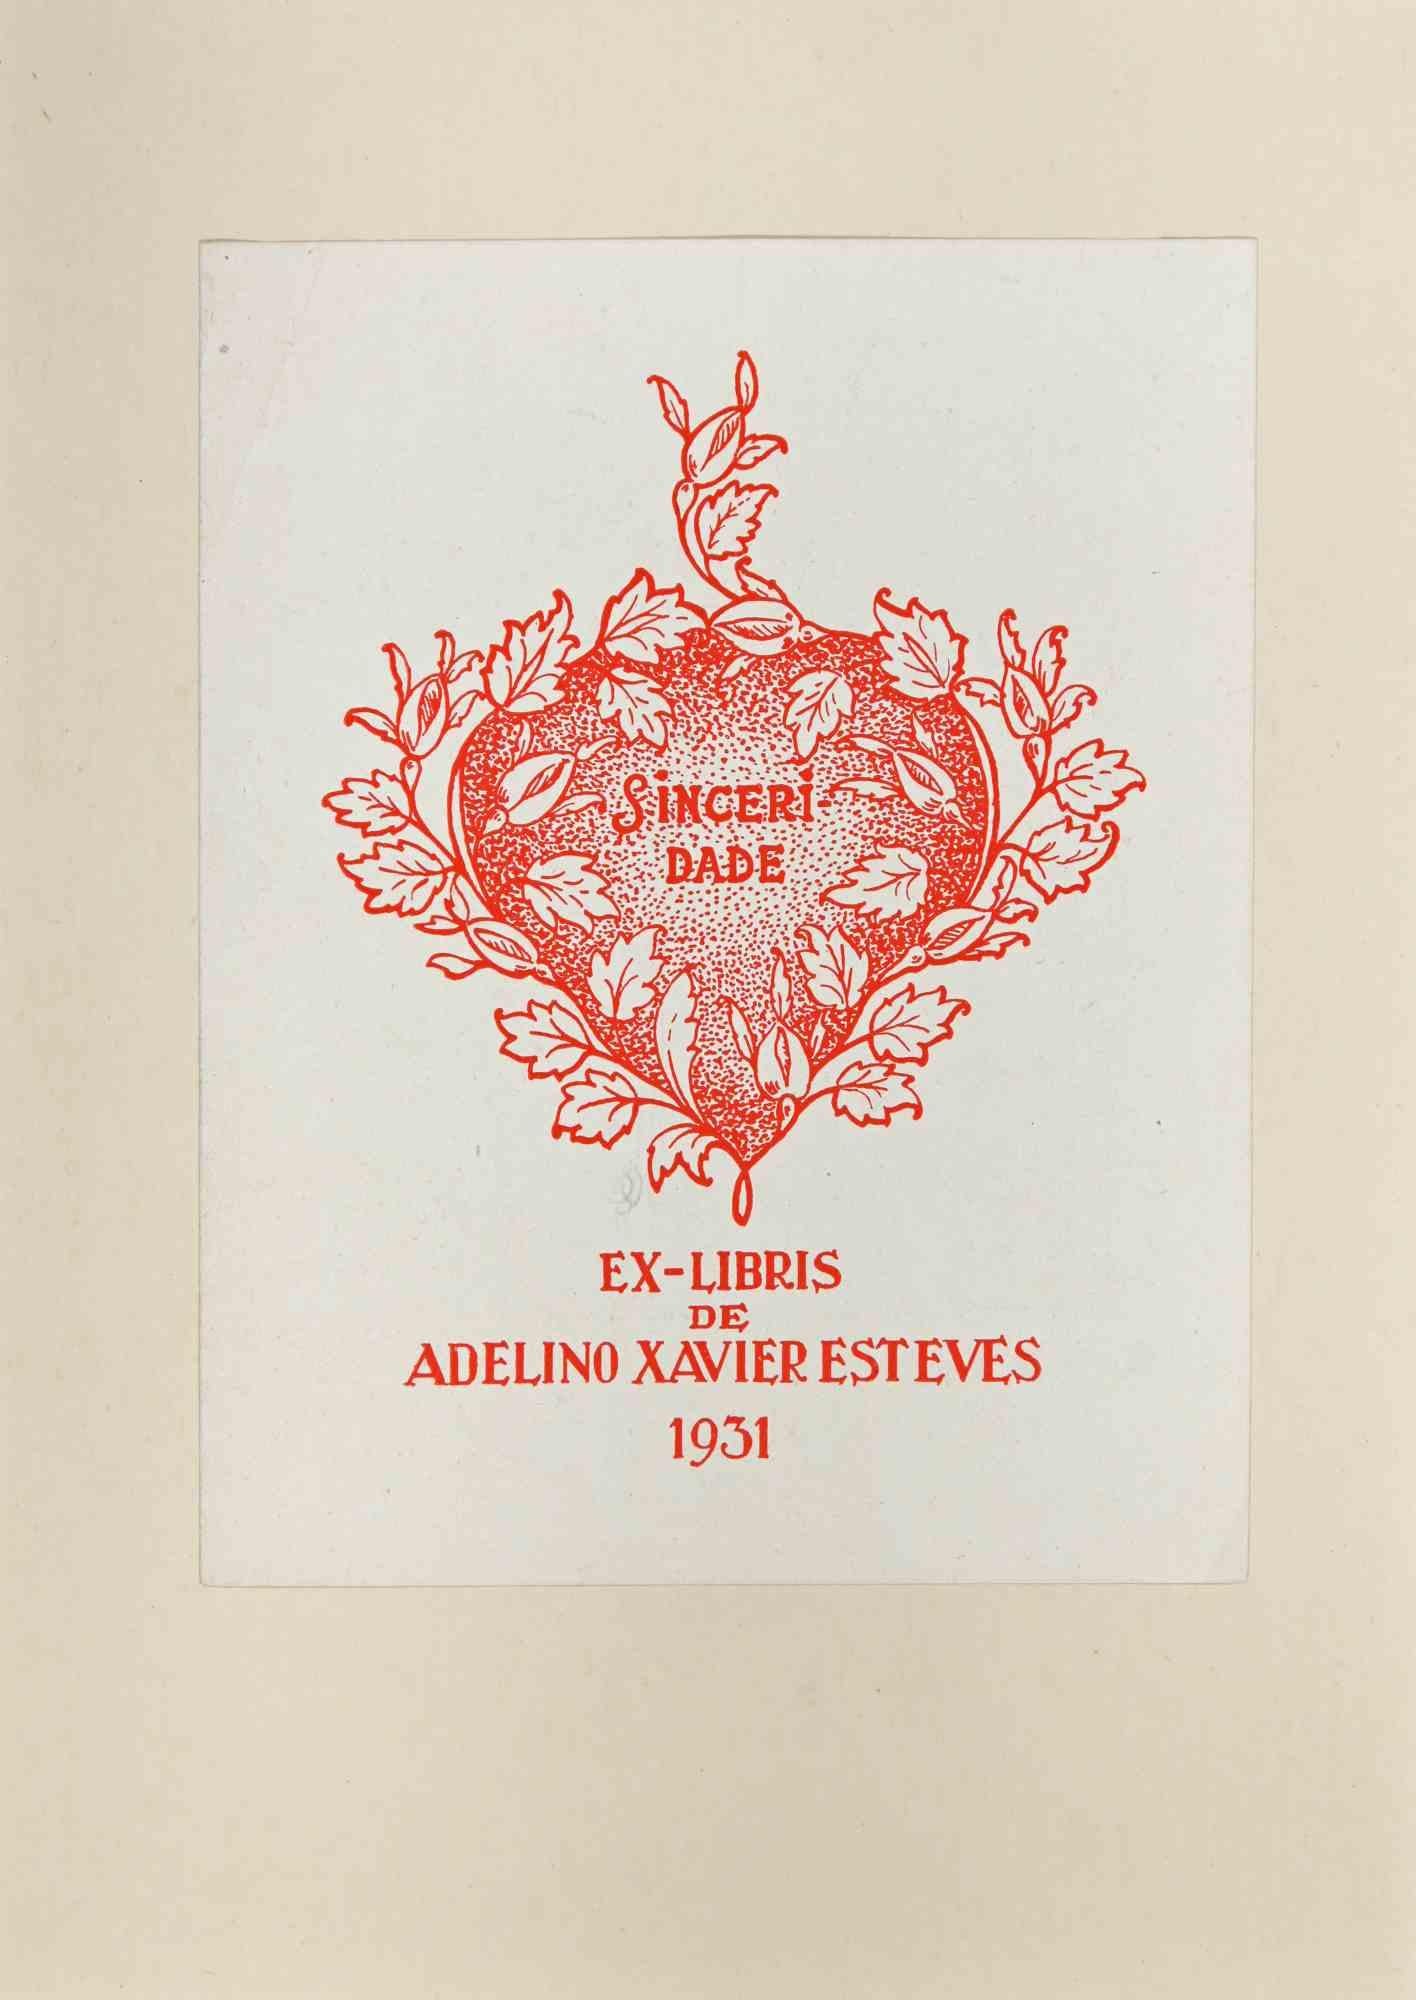 Ex-Libris de Adelino Xavier Esteves is an Artwork realized in 1931, by Adelino Xavier Esteves

Woodcut print on paper. The work is glued on  ivory cardboard. 

Total dimensions: 21 x 15 cm.

Good conditions.

The artwork represents a minimalistic,